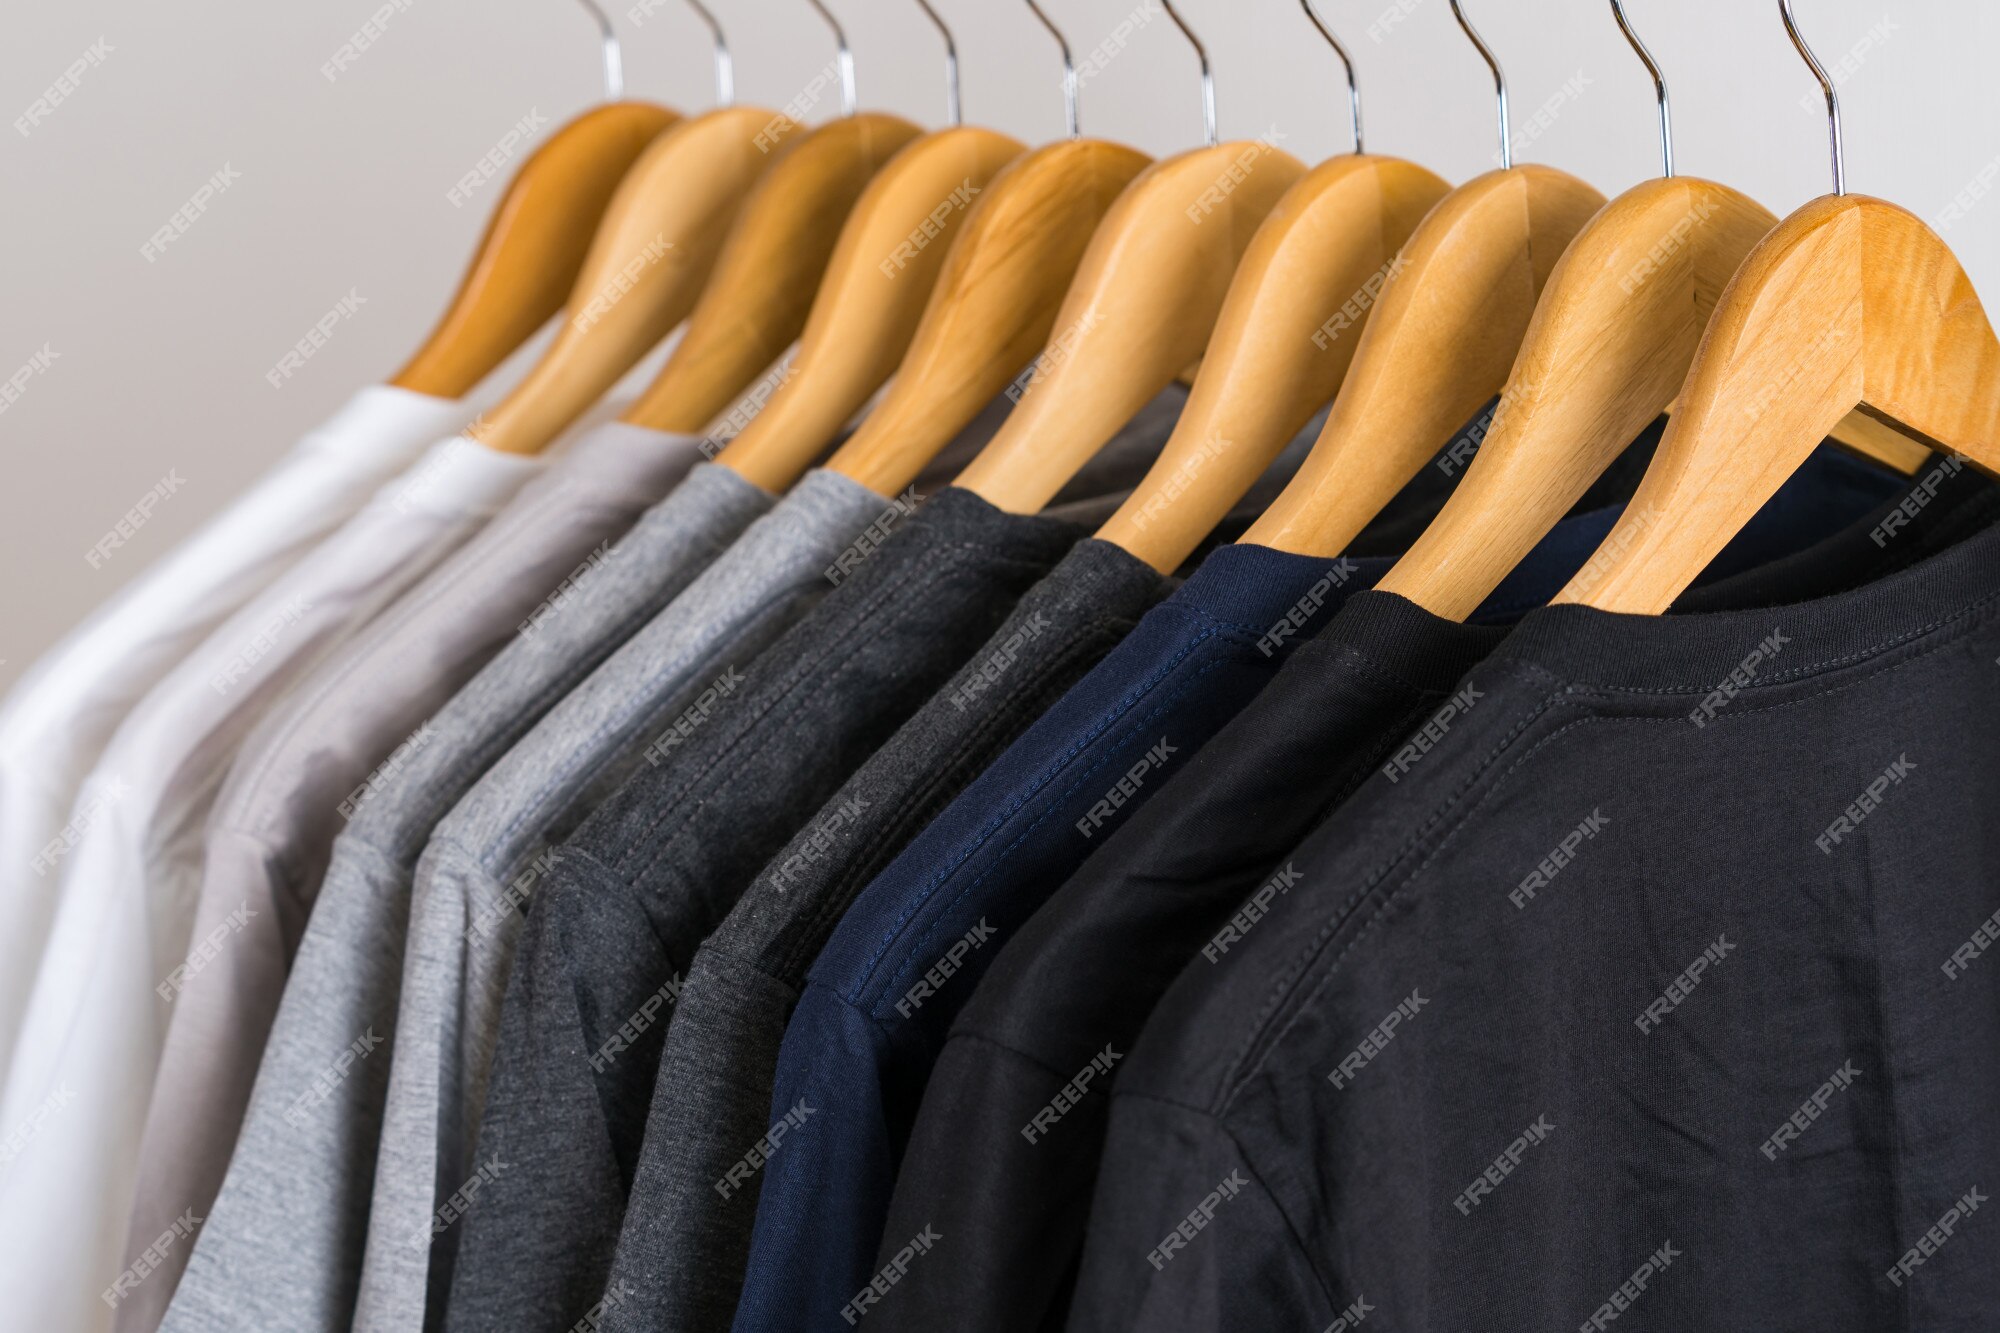 Premium Photo  A selection of men's casual clothes on hangers in a store  shirts jackets and tshirts on hangers style and fashion closeup